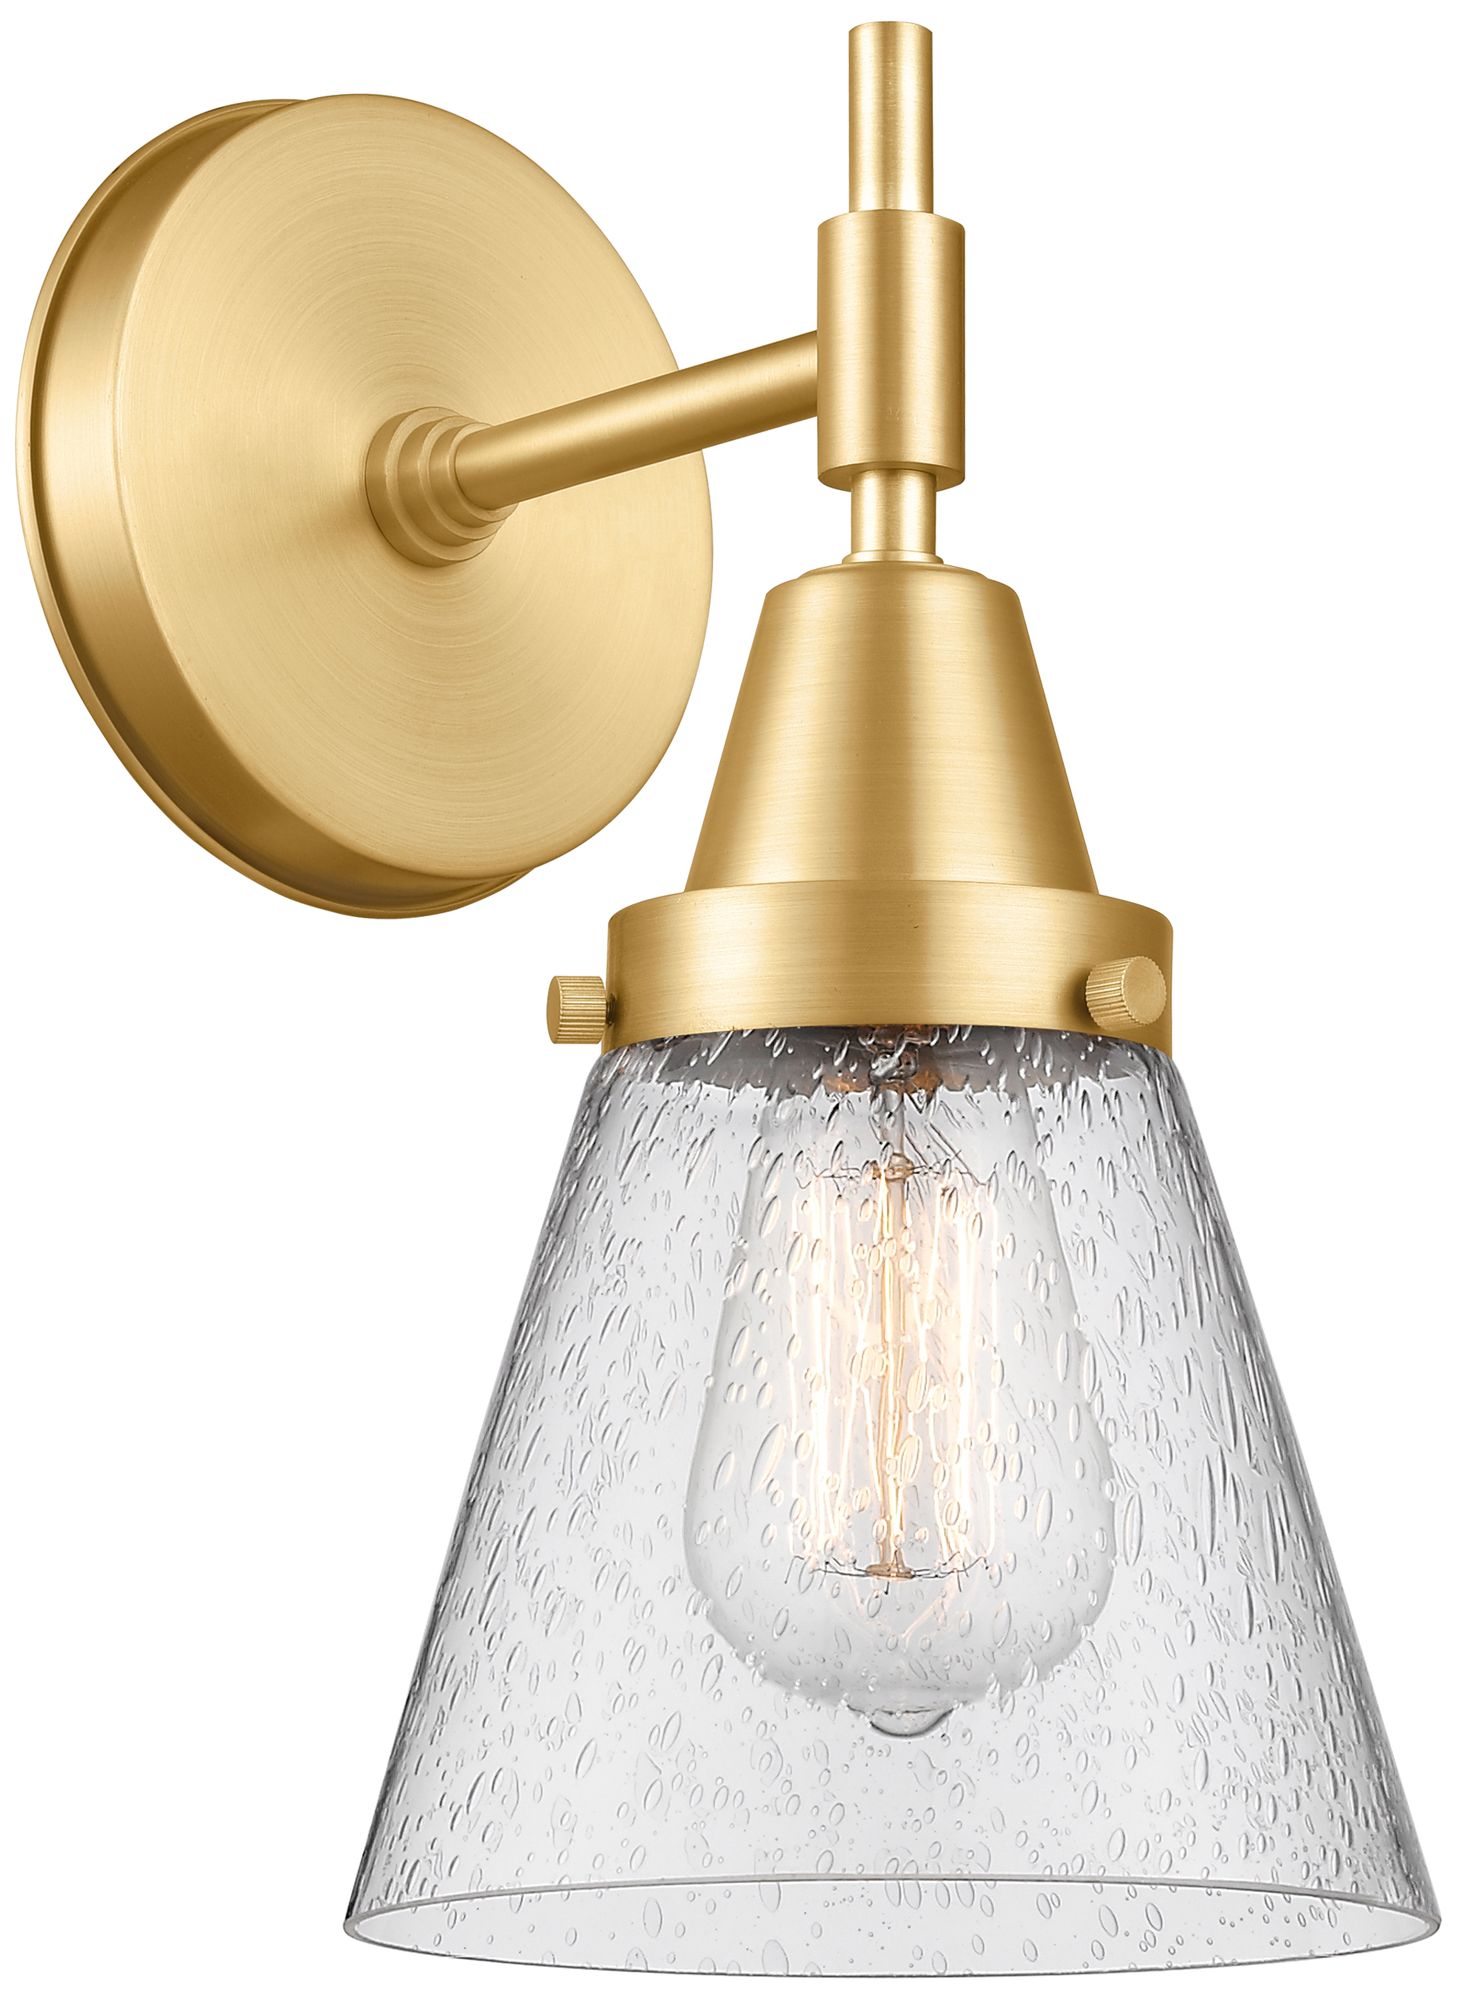 Caden Cone 6" Satin Gold LED Sconce With Seedy Shade